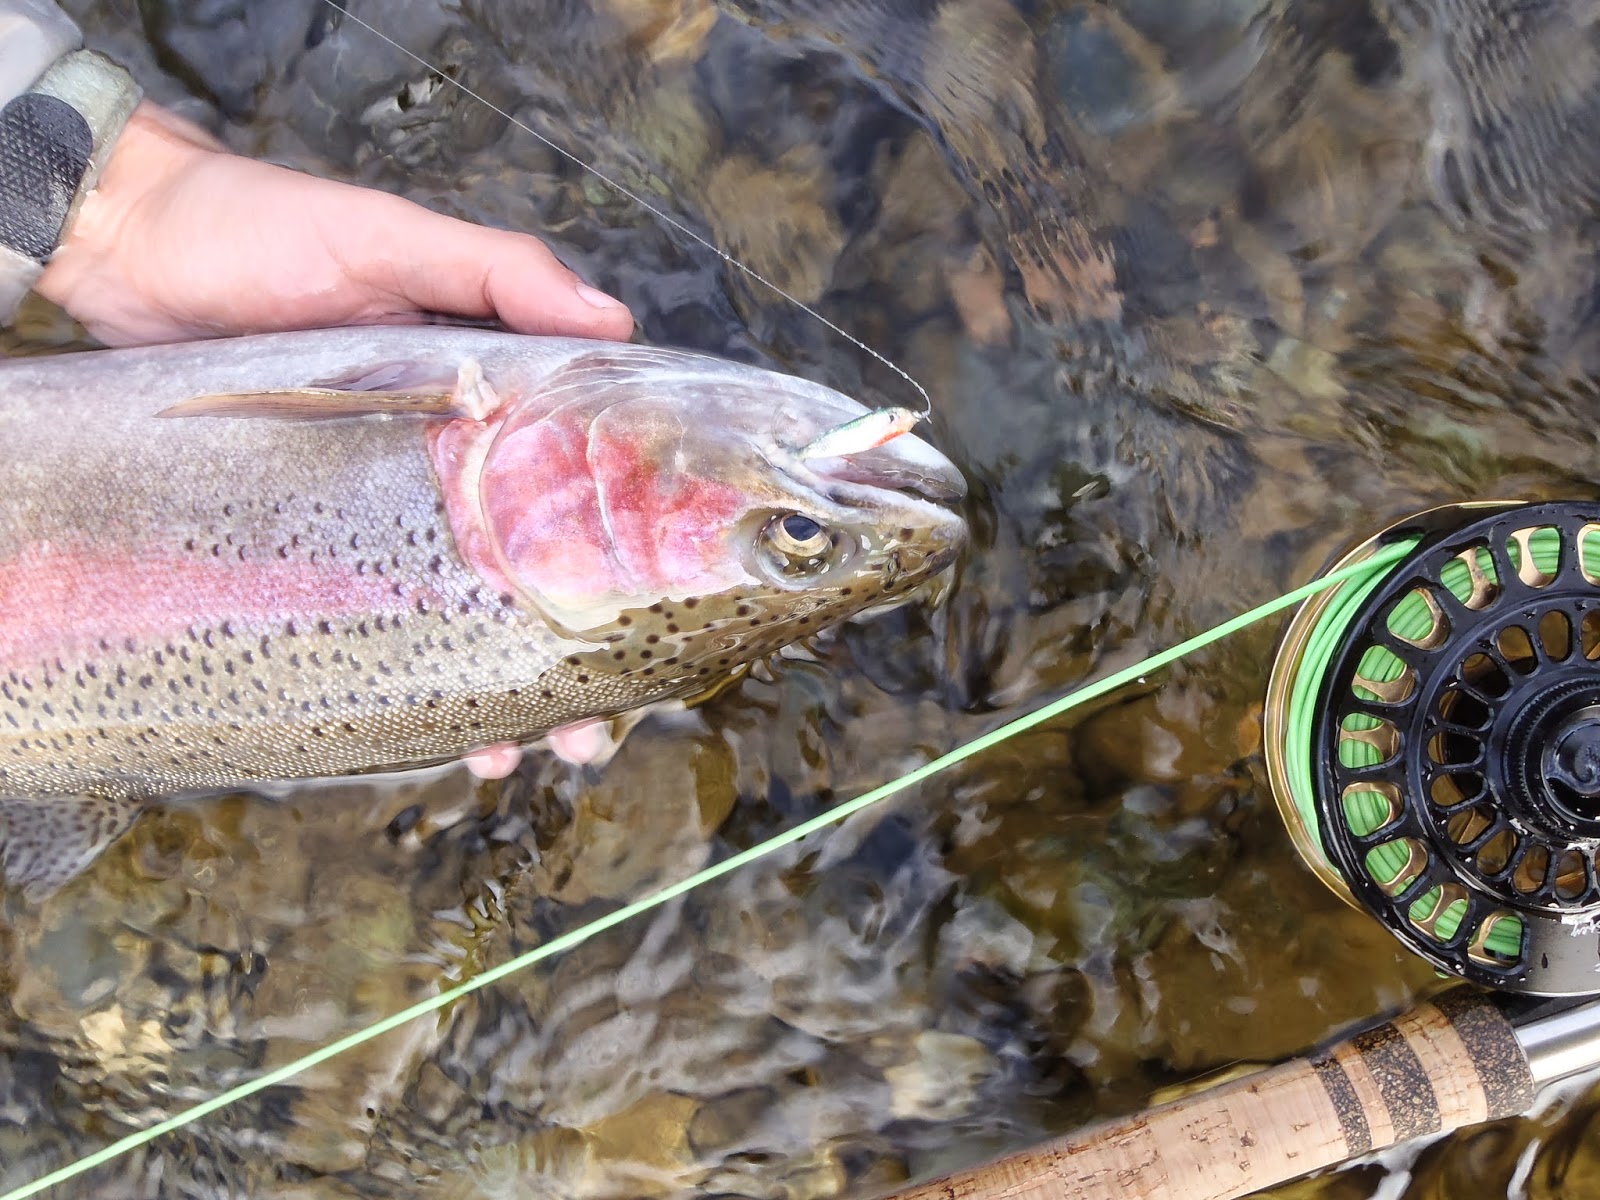 Irideus International Spey Casting & Fly Fishing Forum: Fly fishing  steelhead and trophy trout with Irideus minnow fly fishing fly patterns is  something to hang on to.